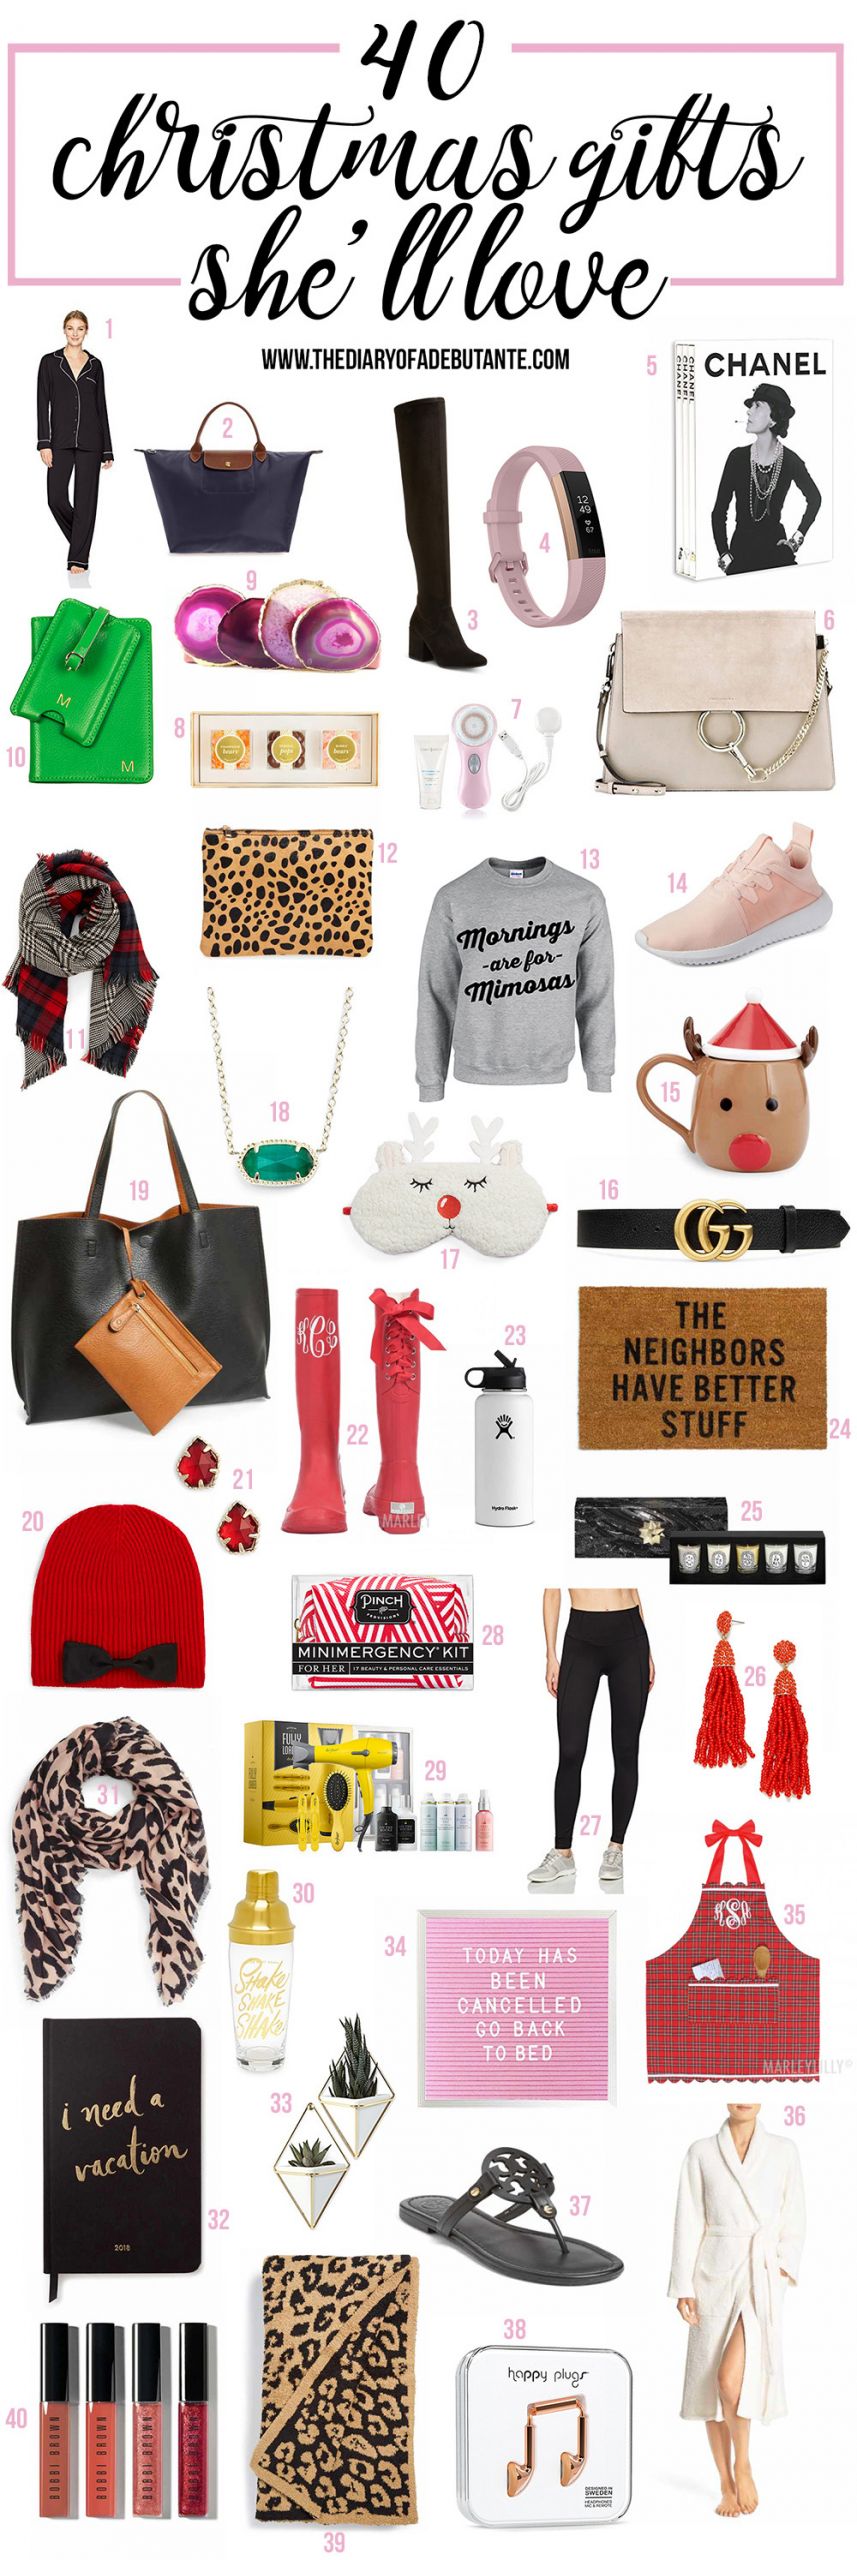 Gift Ideas For Girlfriends
 Great Gift Ideas For Girlfriend